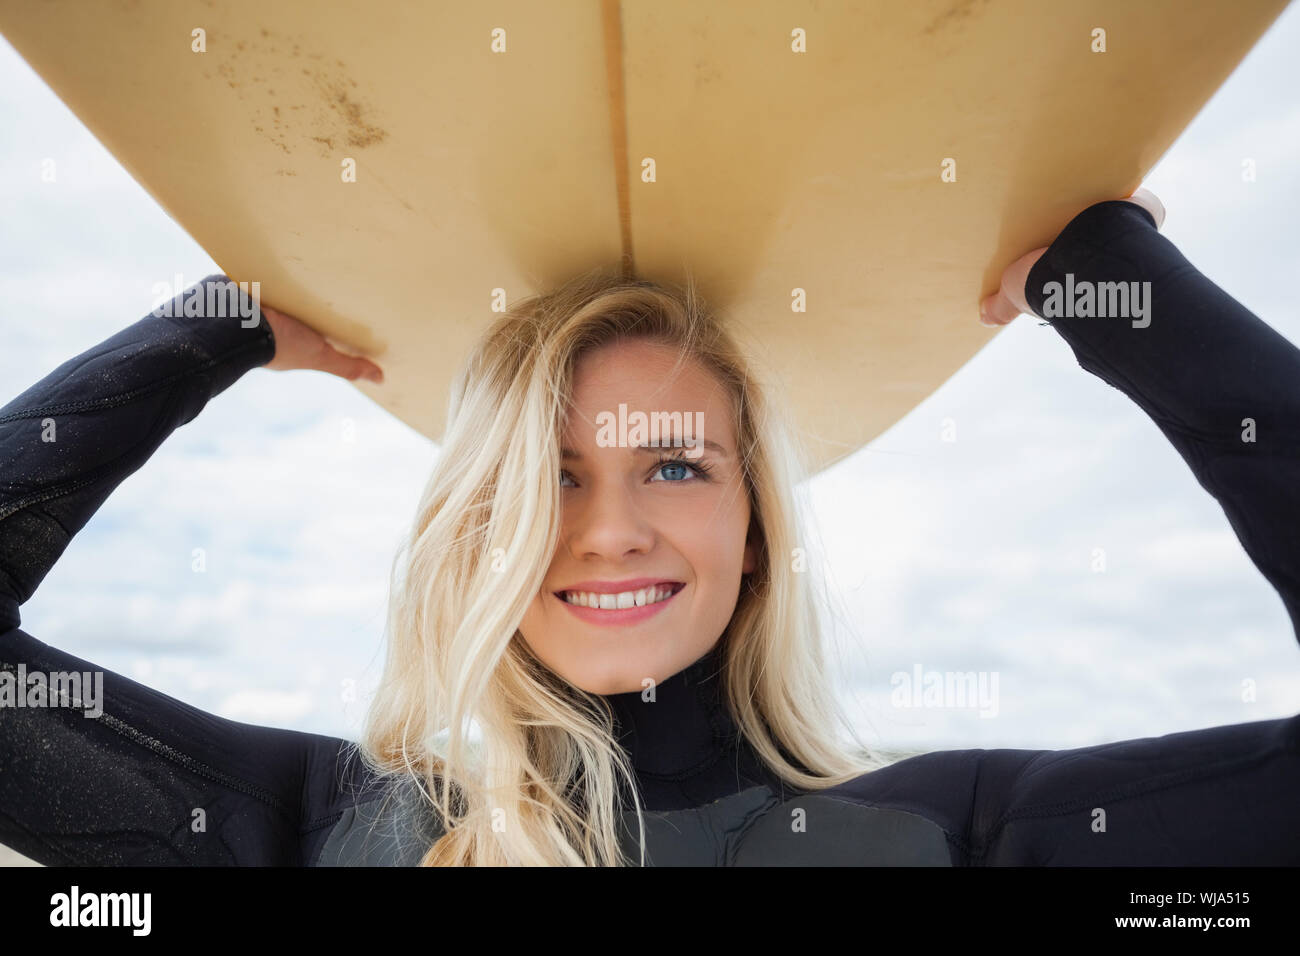 Close up of a smiling young woman in wet suit holding surfboard over head at beach Stock Photo